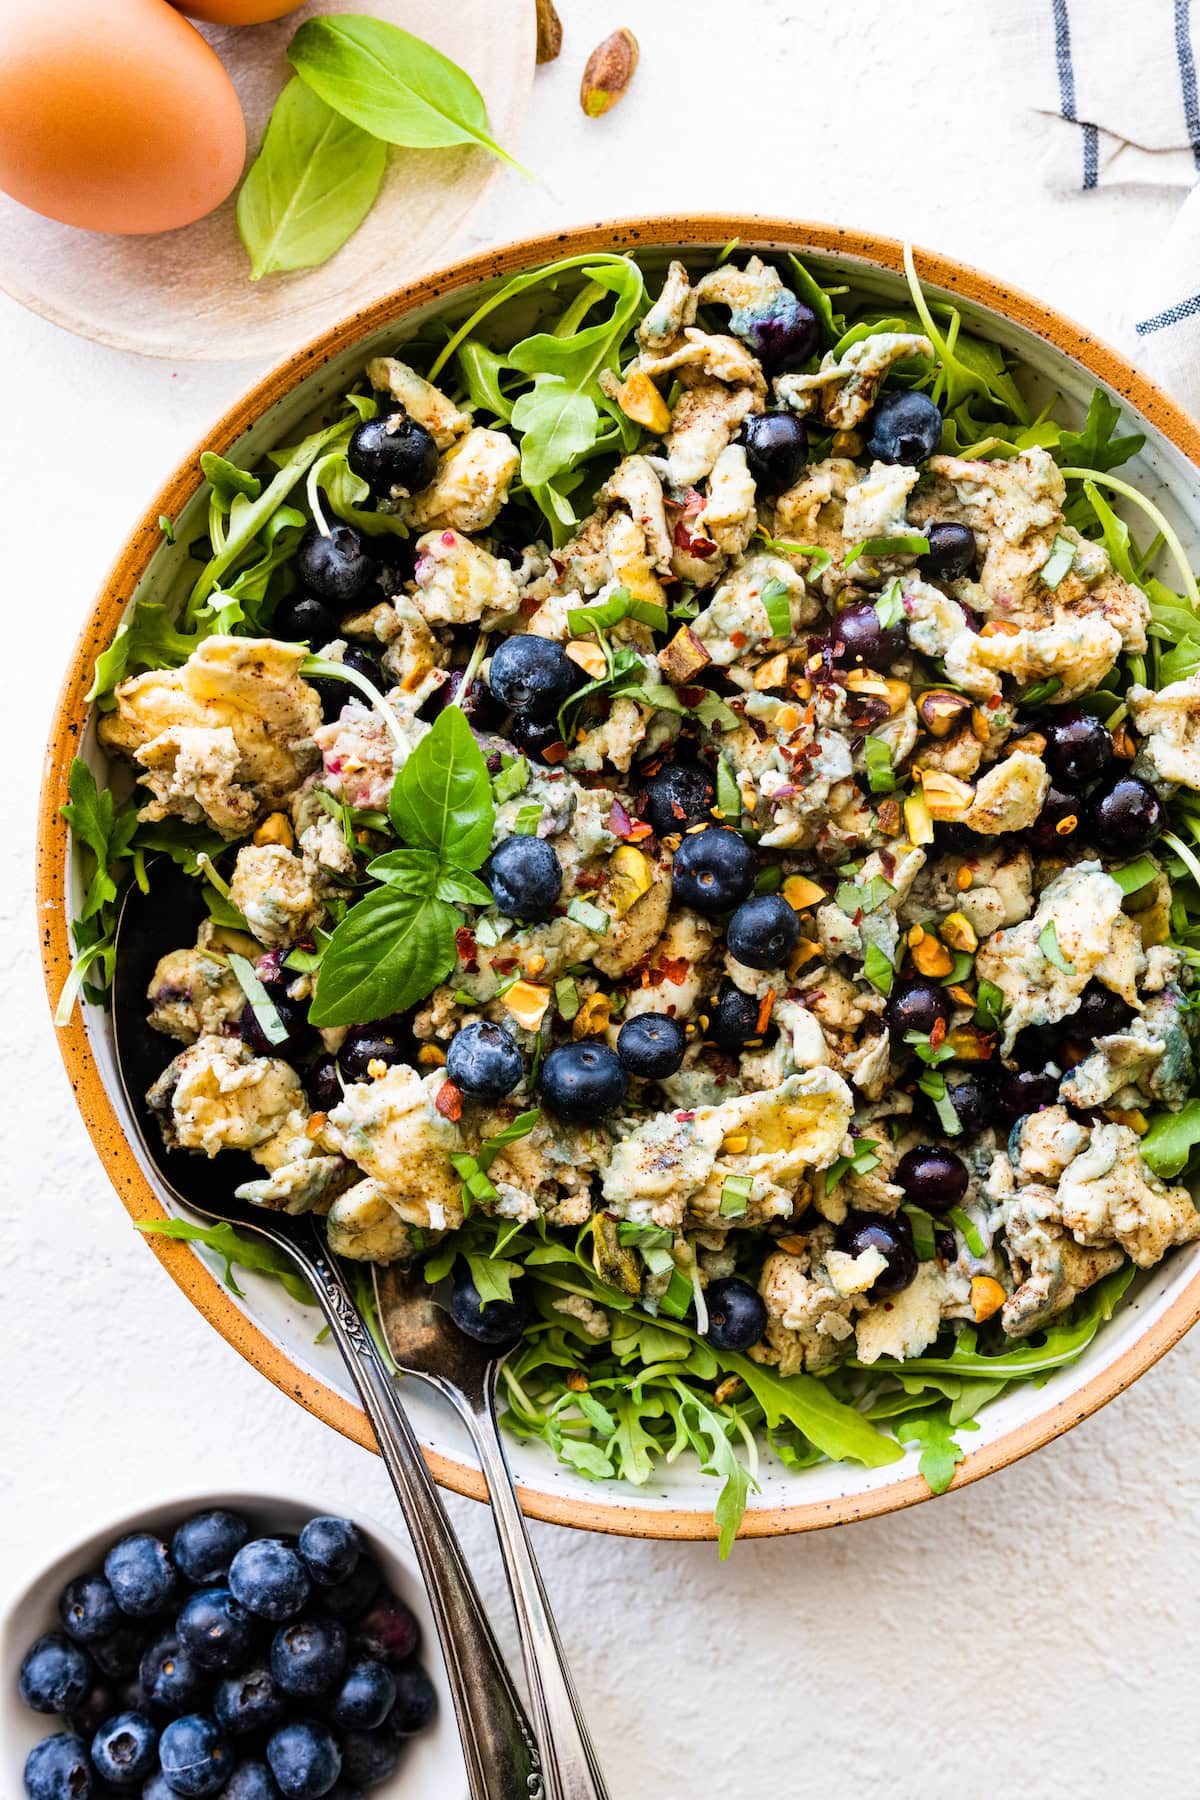 A blueberry breakfast salad with eggs and fresh greens in a bowl.